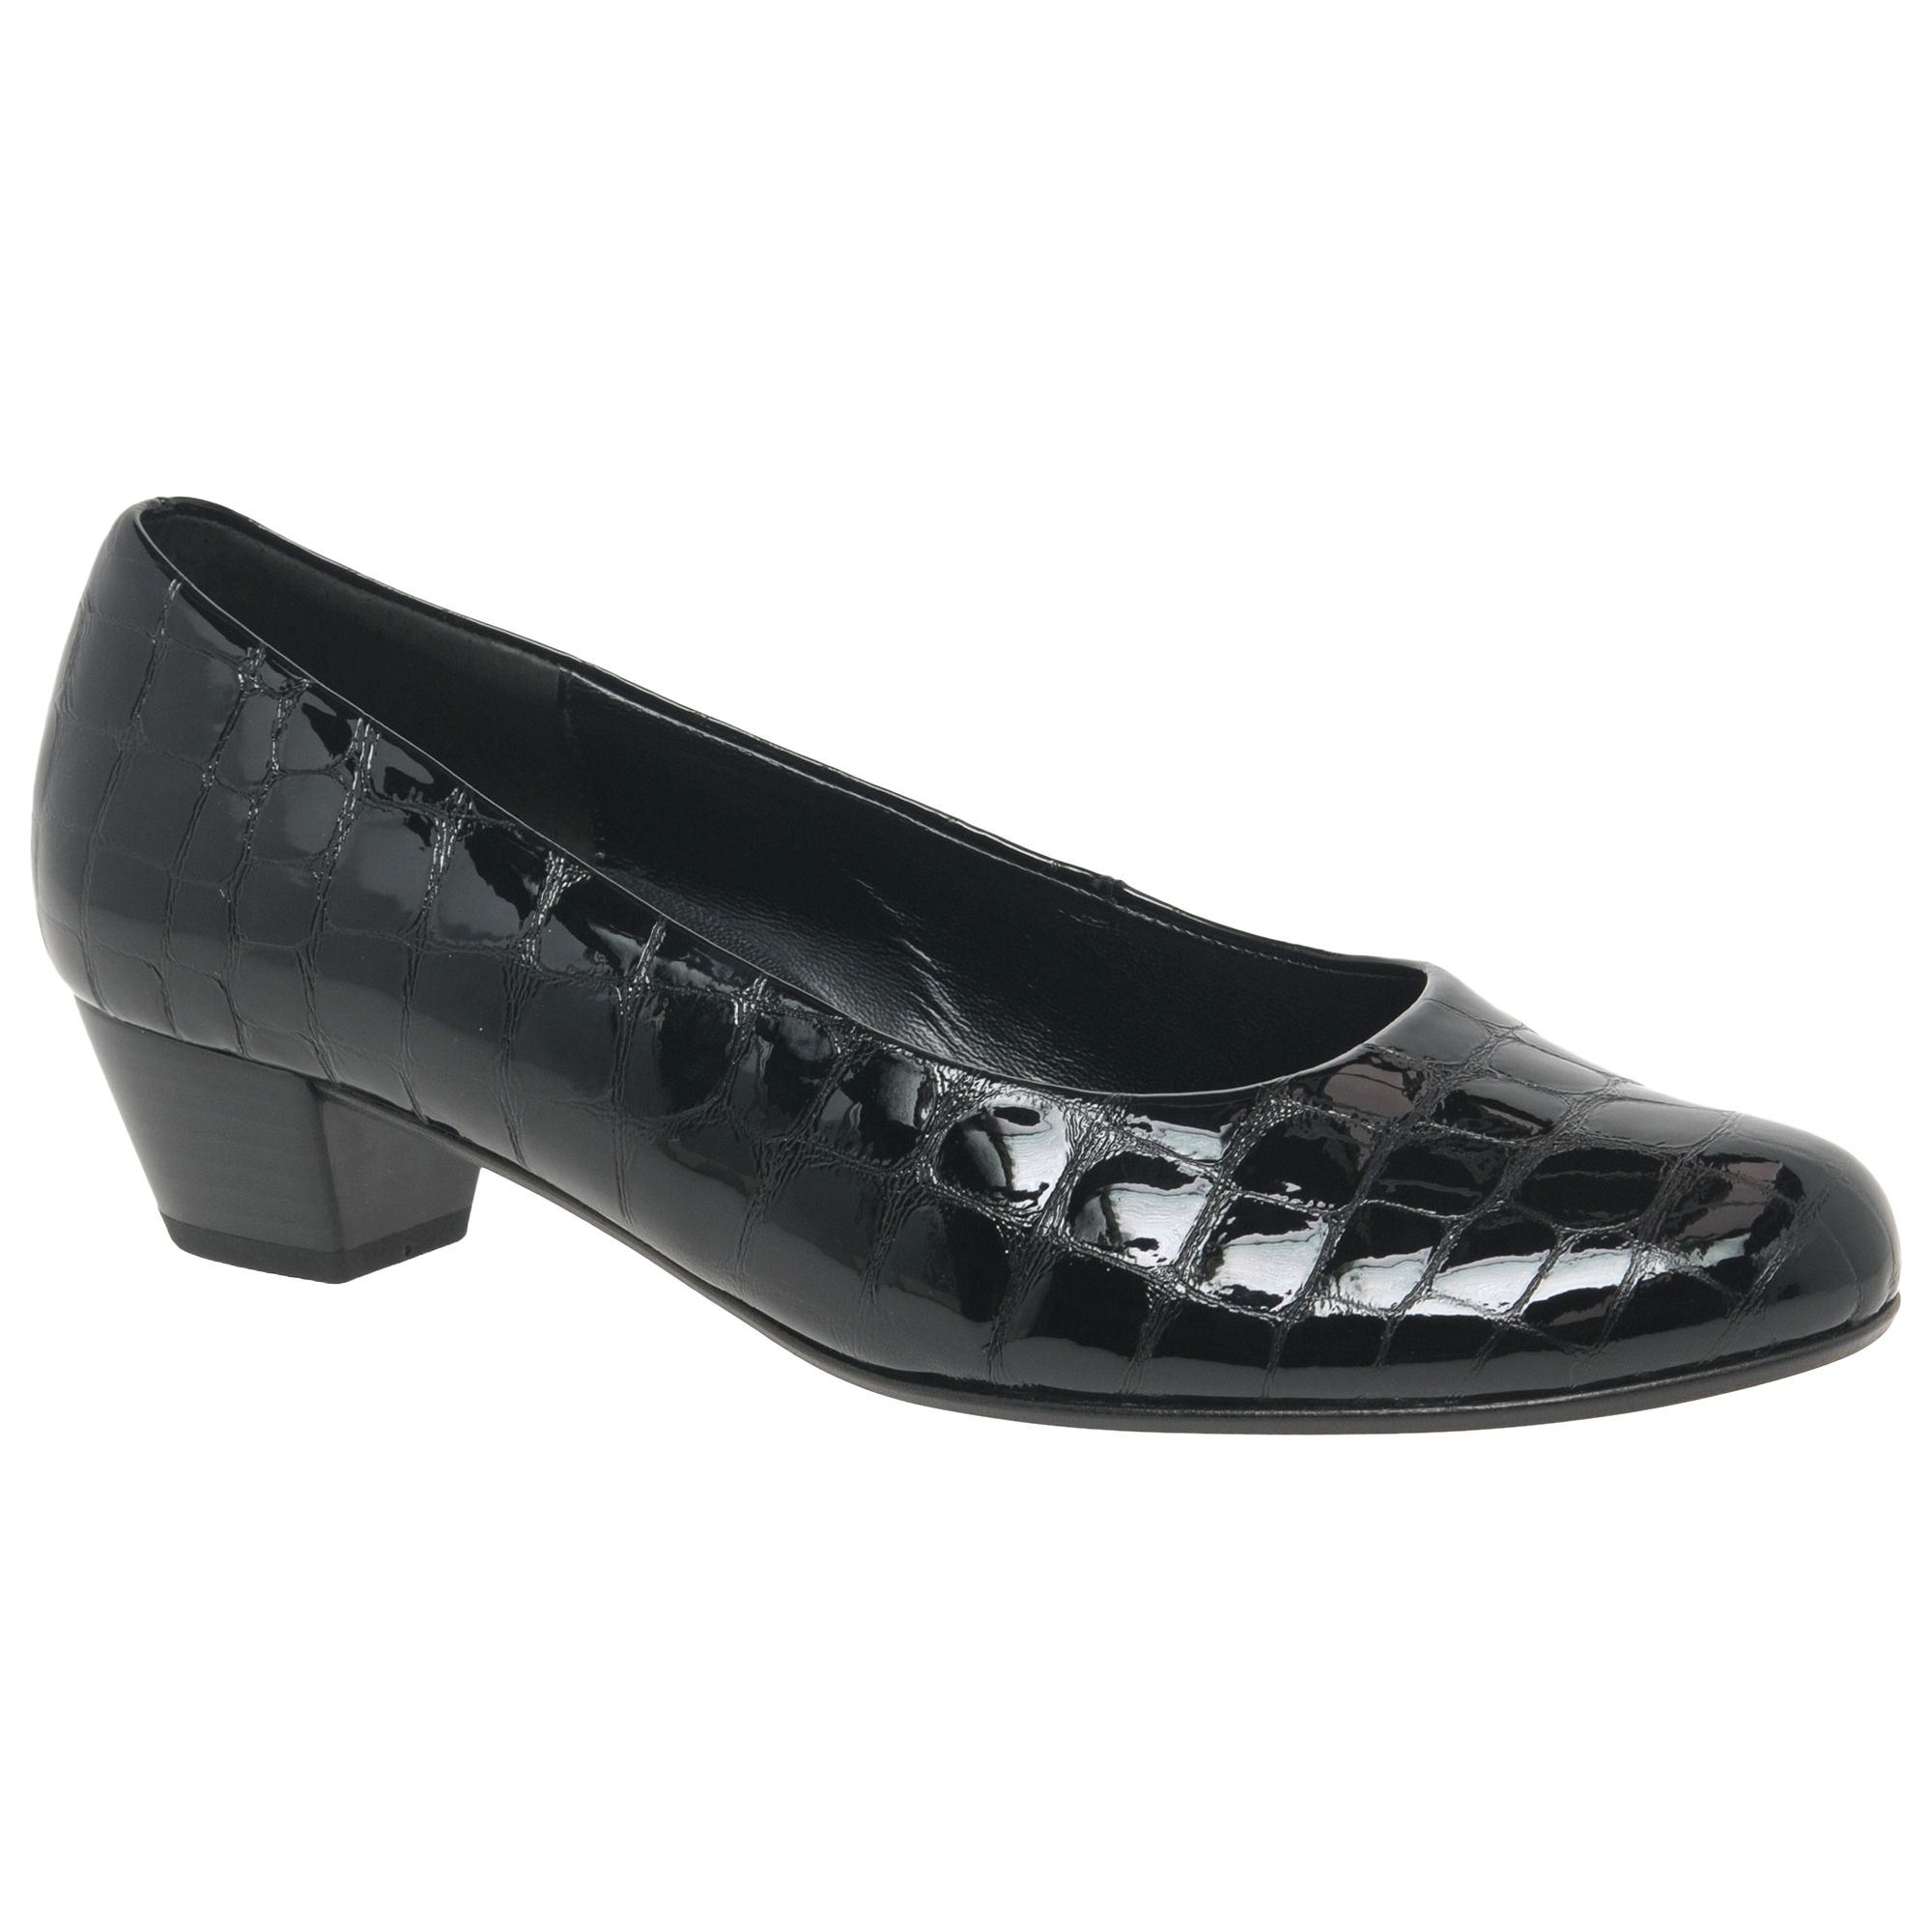 gabor extra wide fit shoes